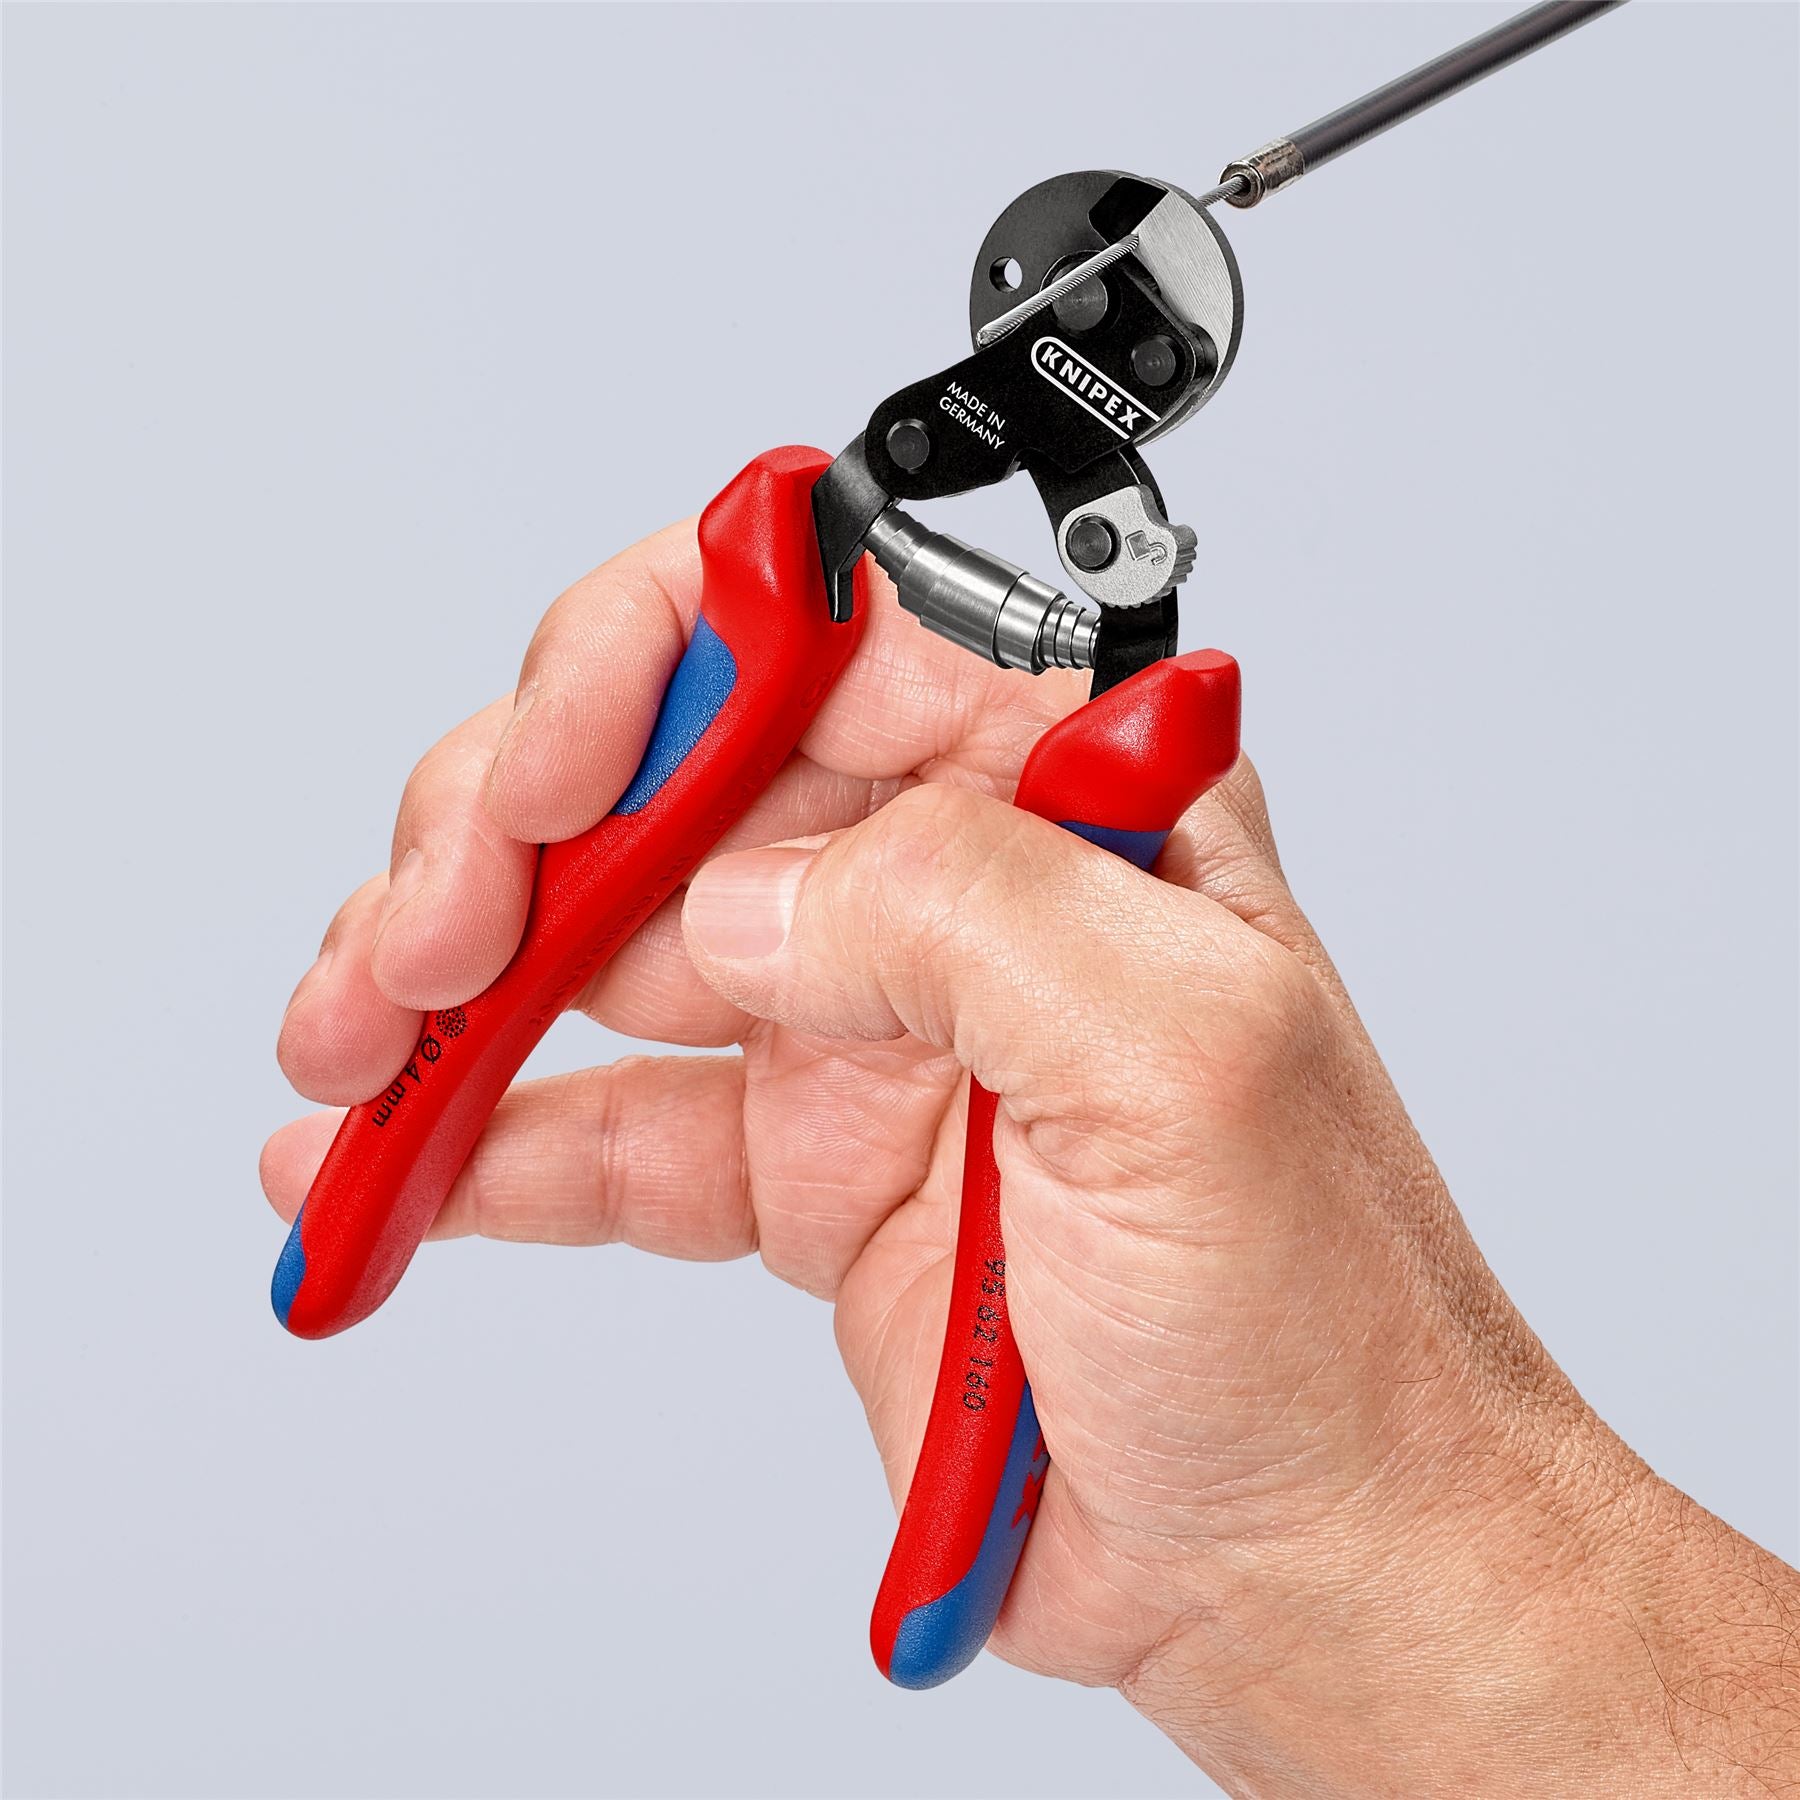 Knipex Wire Rope Cutter Multi Component Grips up to 6mm Cutting Capacity 160mm 95 62 160